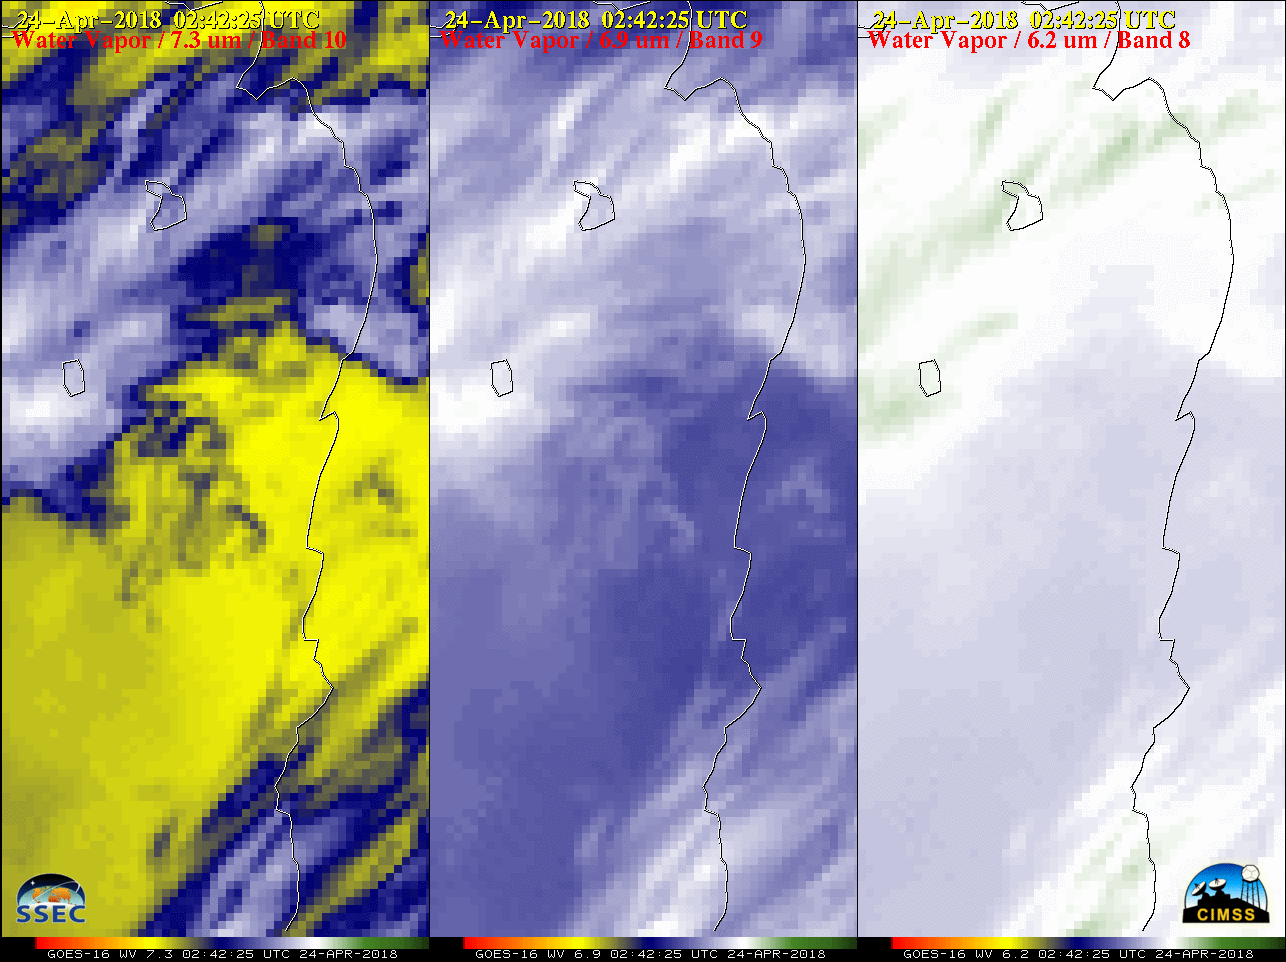 GOES-16 Low-level (7.3 µm, left), Mid-level (6.9 µm, center) and Upper-level (6.2 µm, right) Water Vapor images [click to play animation | MP4]